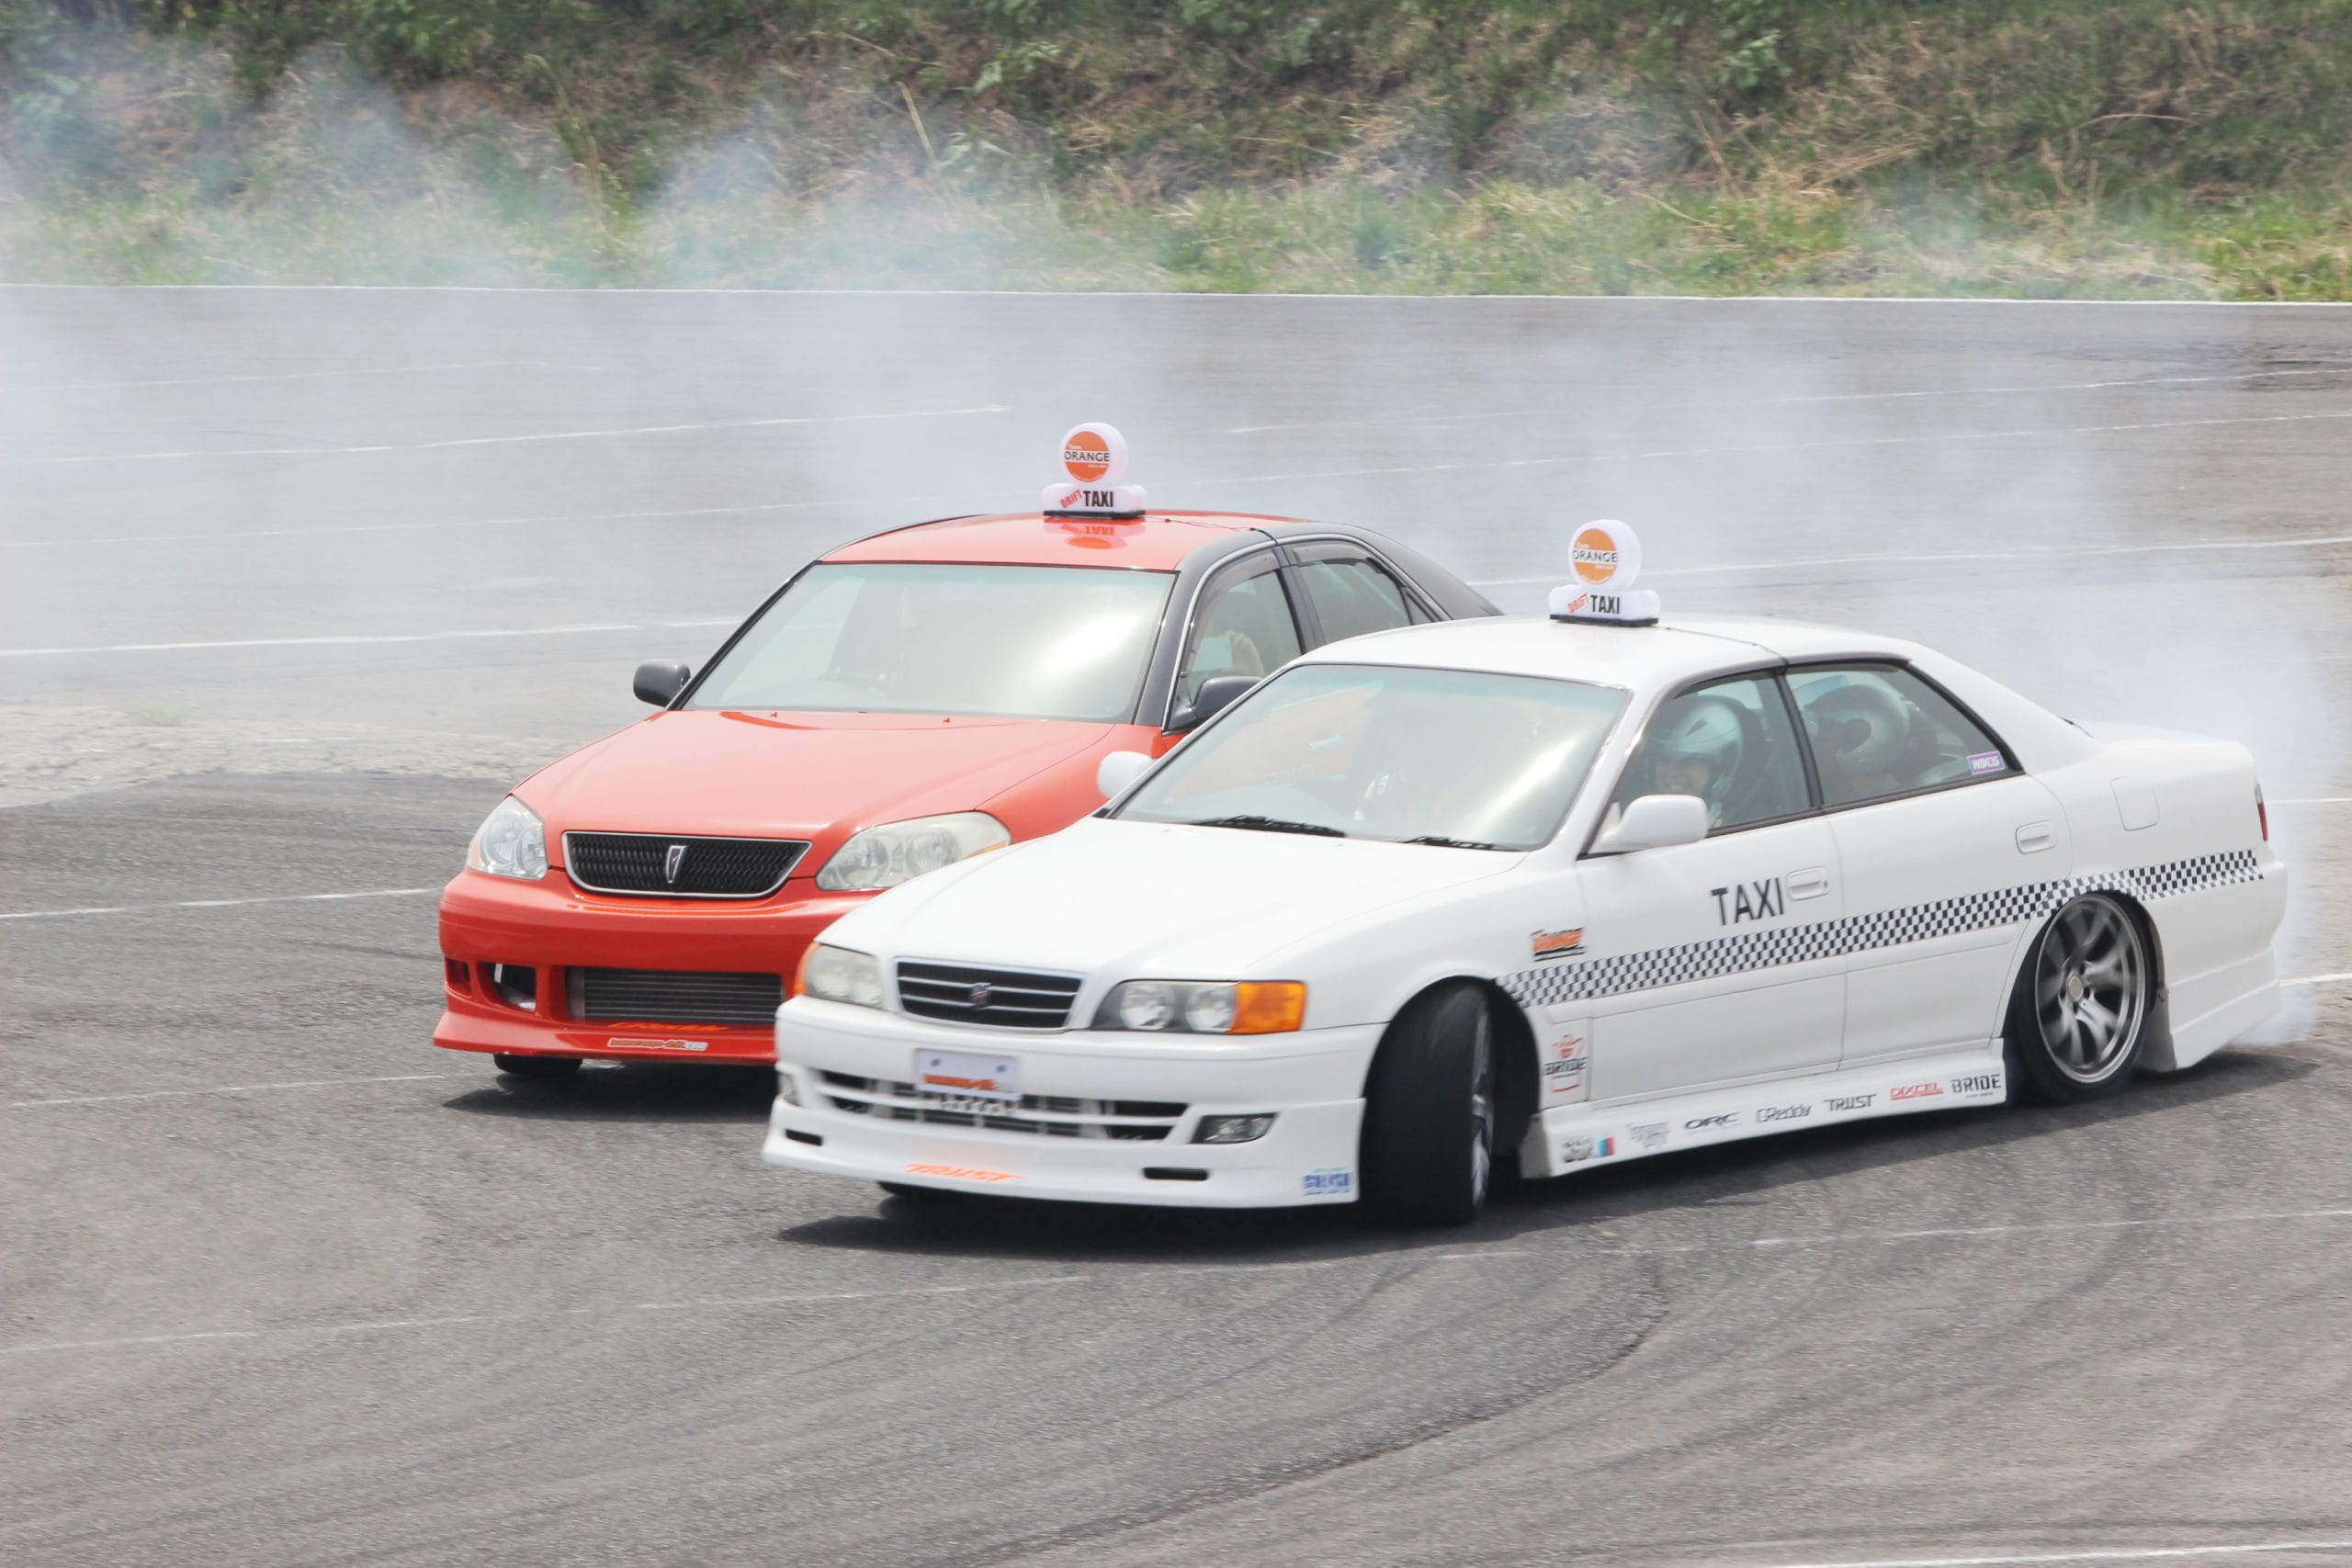 Feel the Need for Speed in a Fukushima Drift Taxi